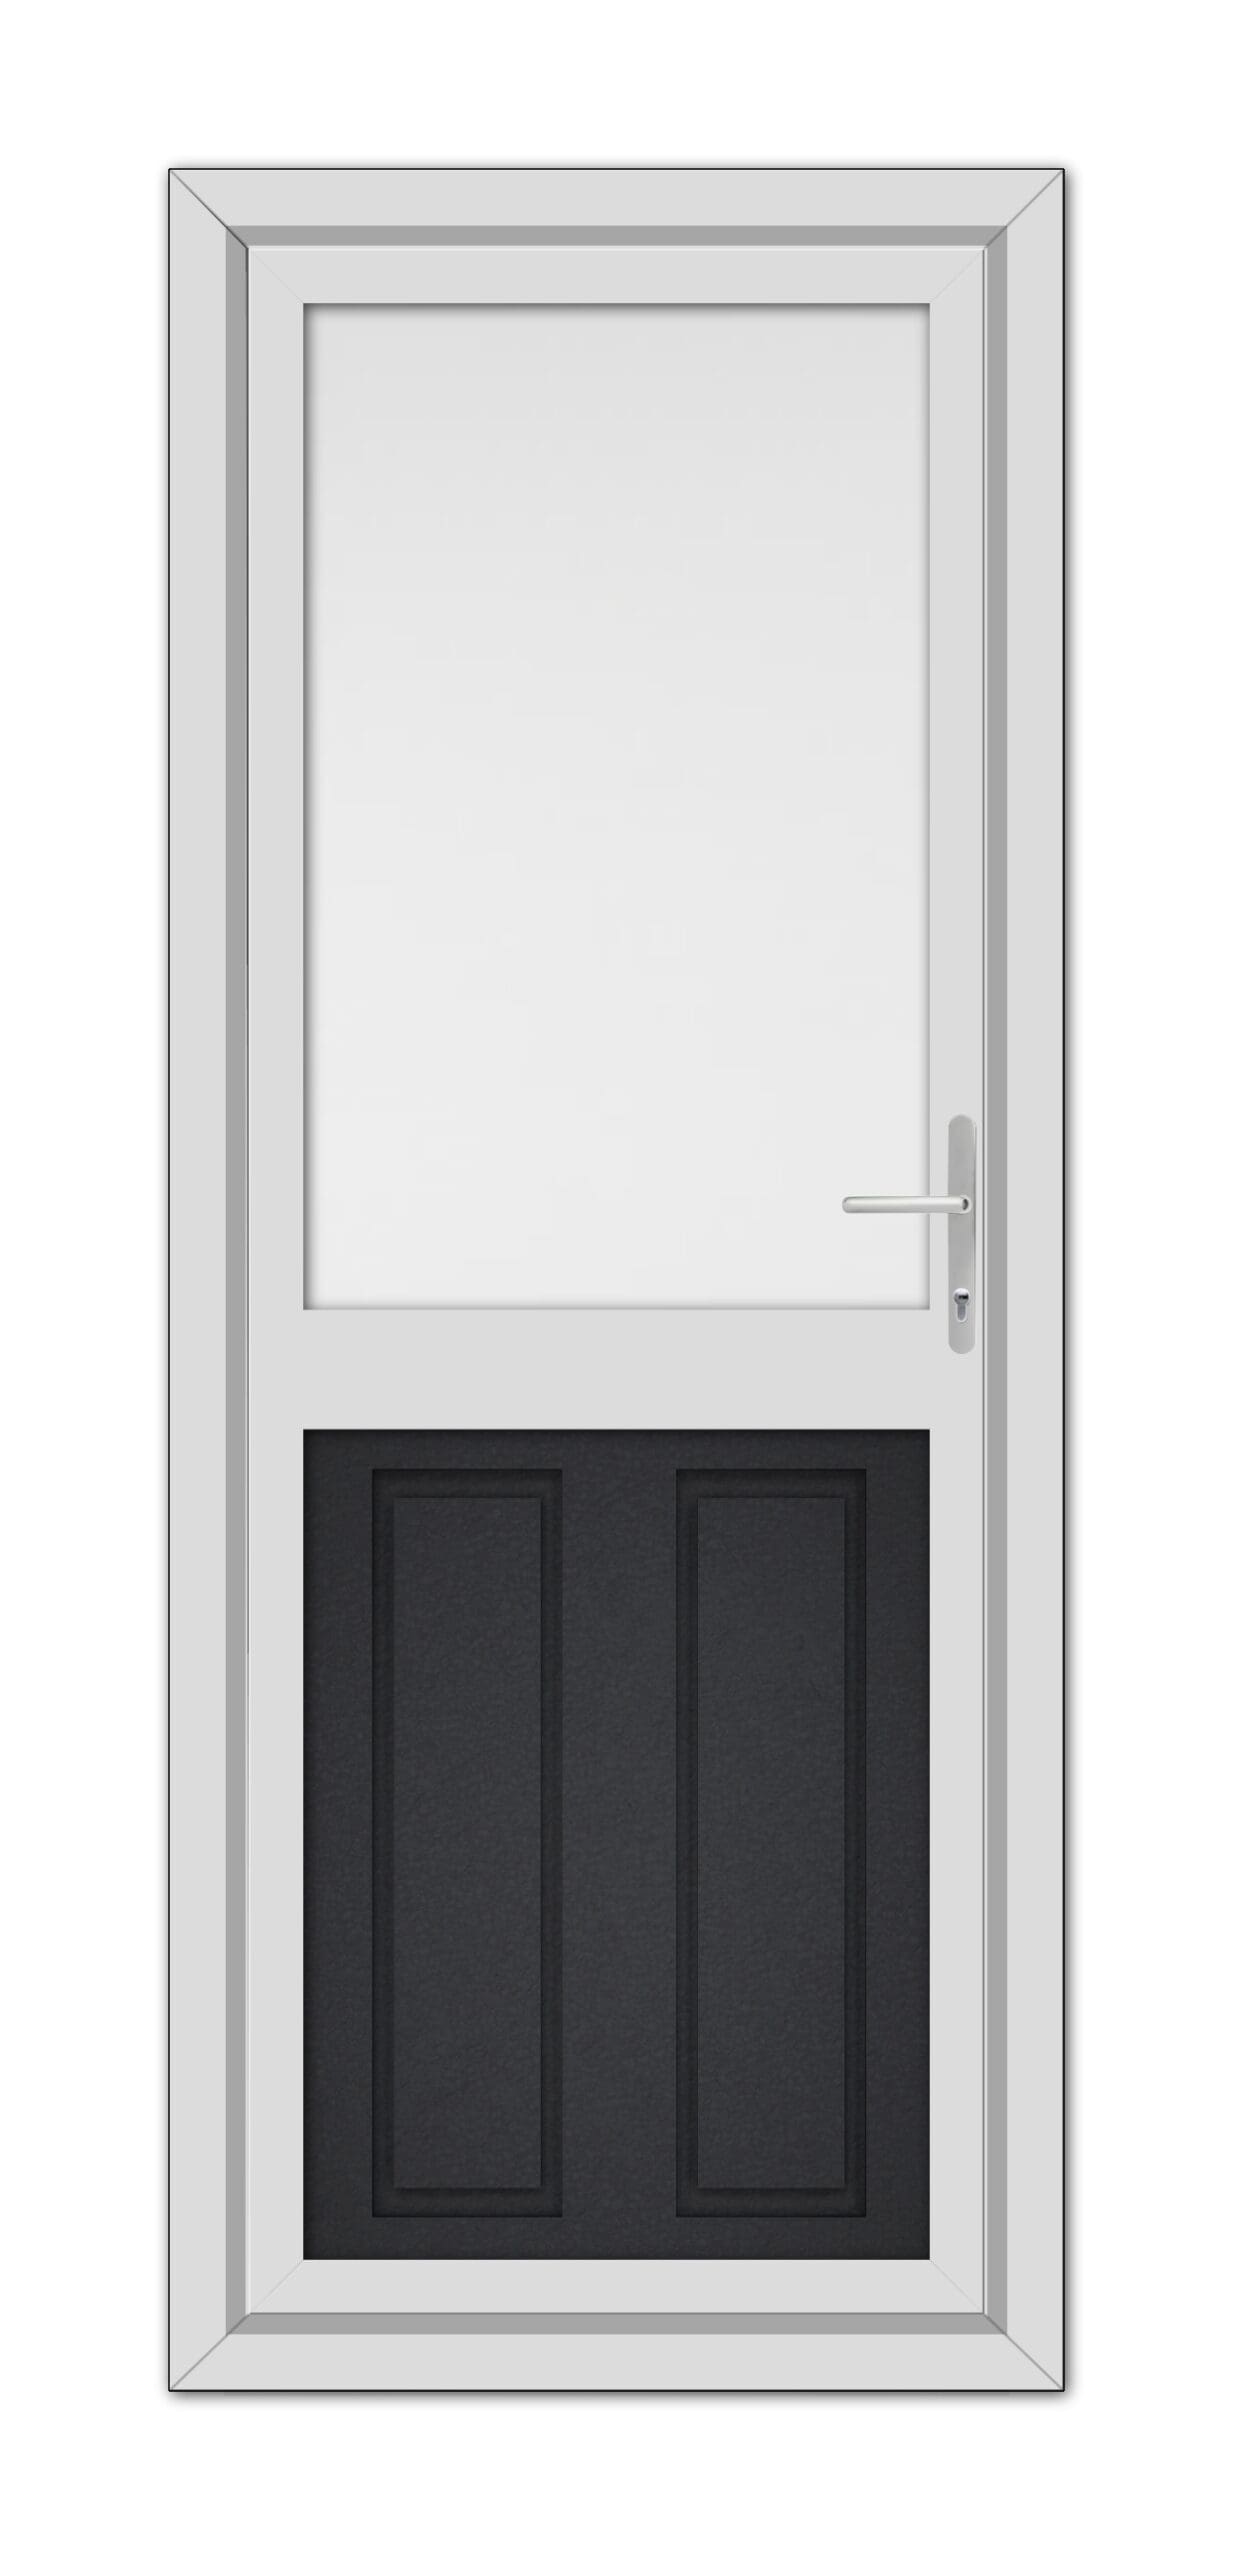 A modern Black Brown Manor Half uPVC Back Door featuring a top window and two lower black panels, equipped with a metal handle, isolated on a white background.